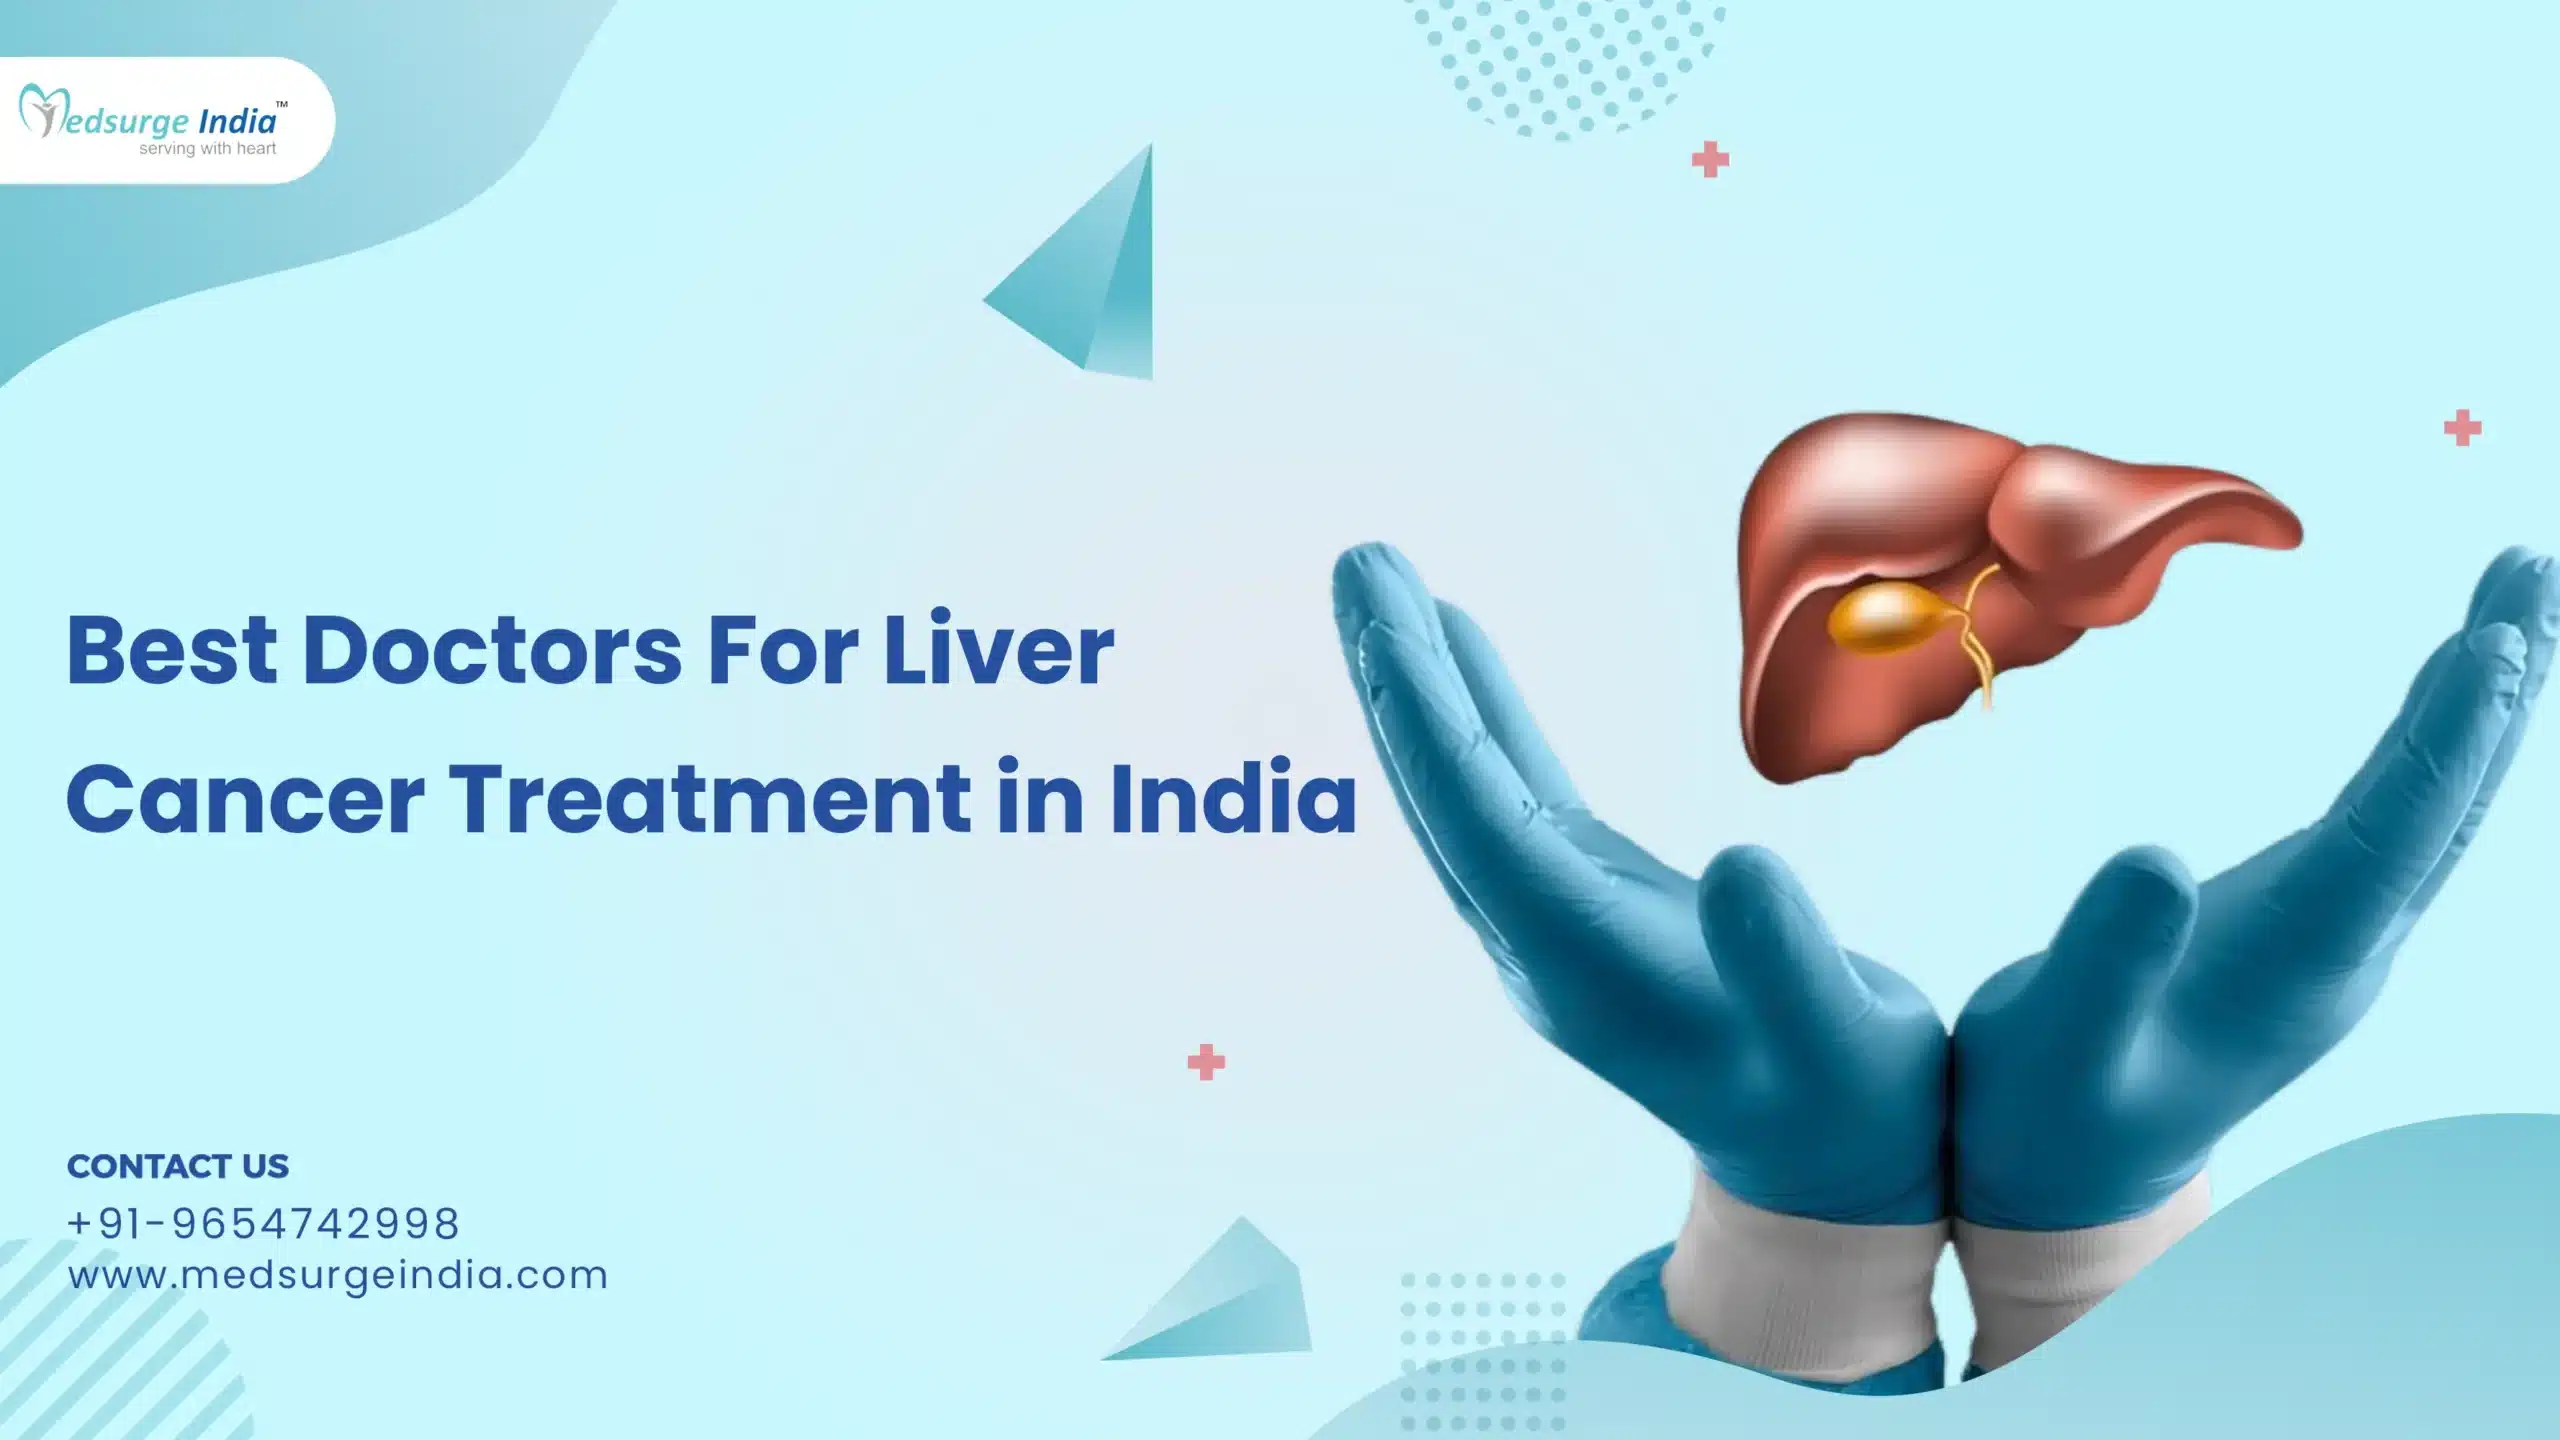 Best Doctors For Liver Cancer Treatment in India